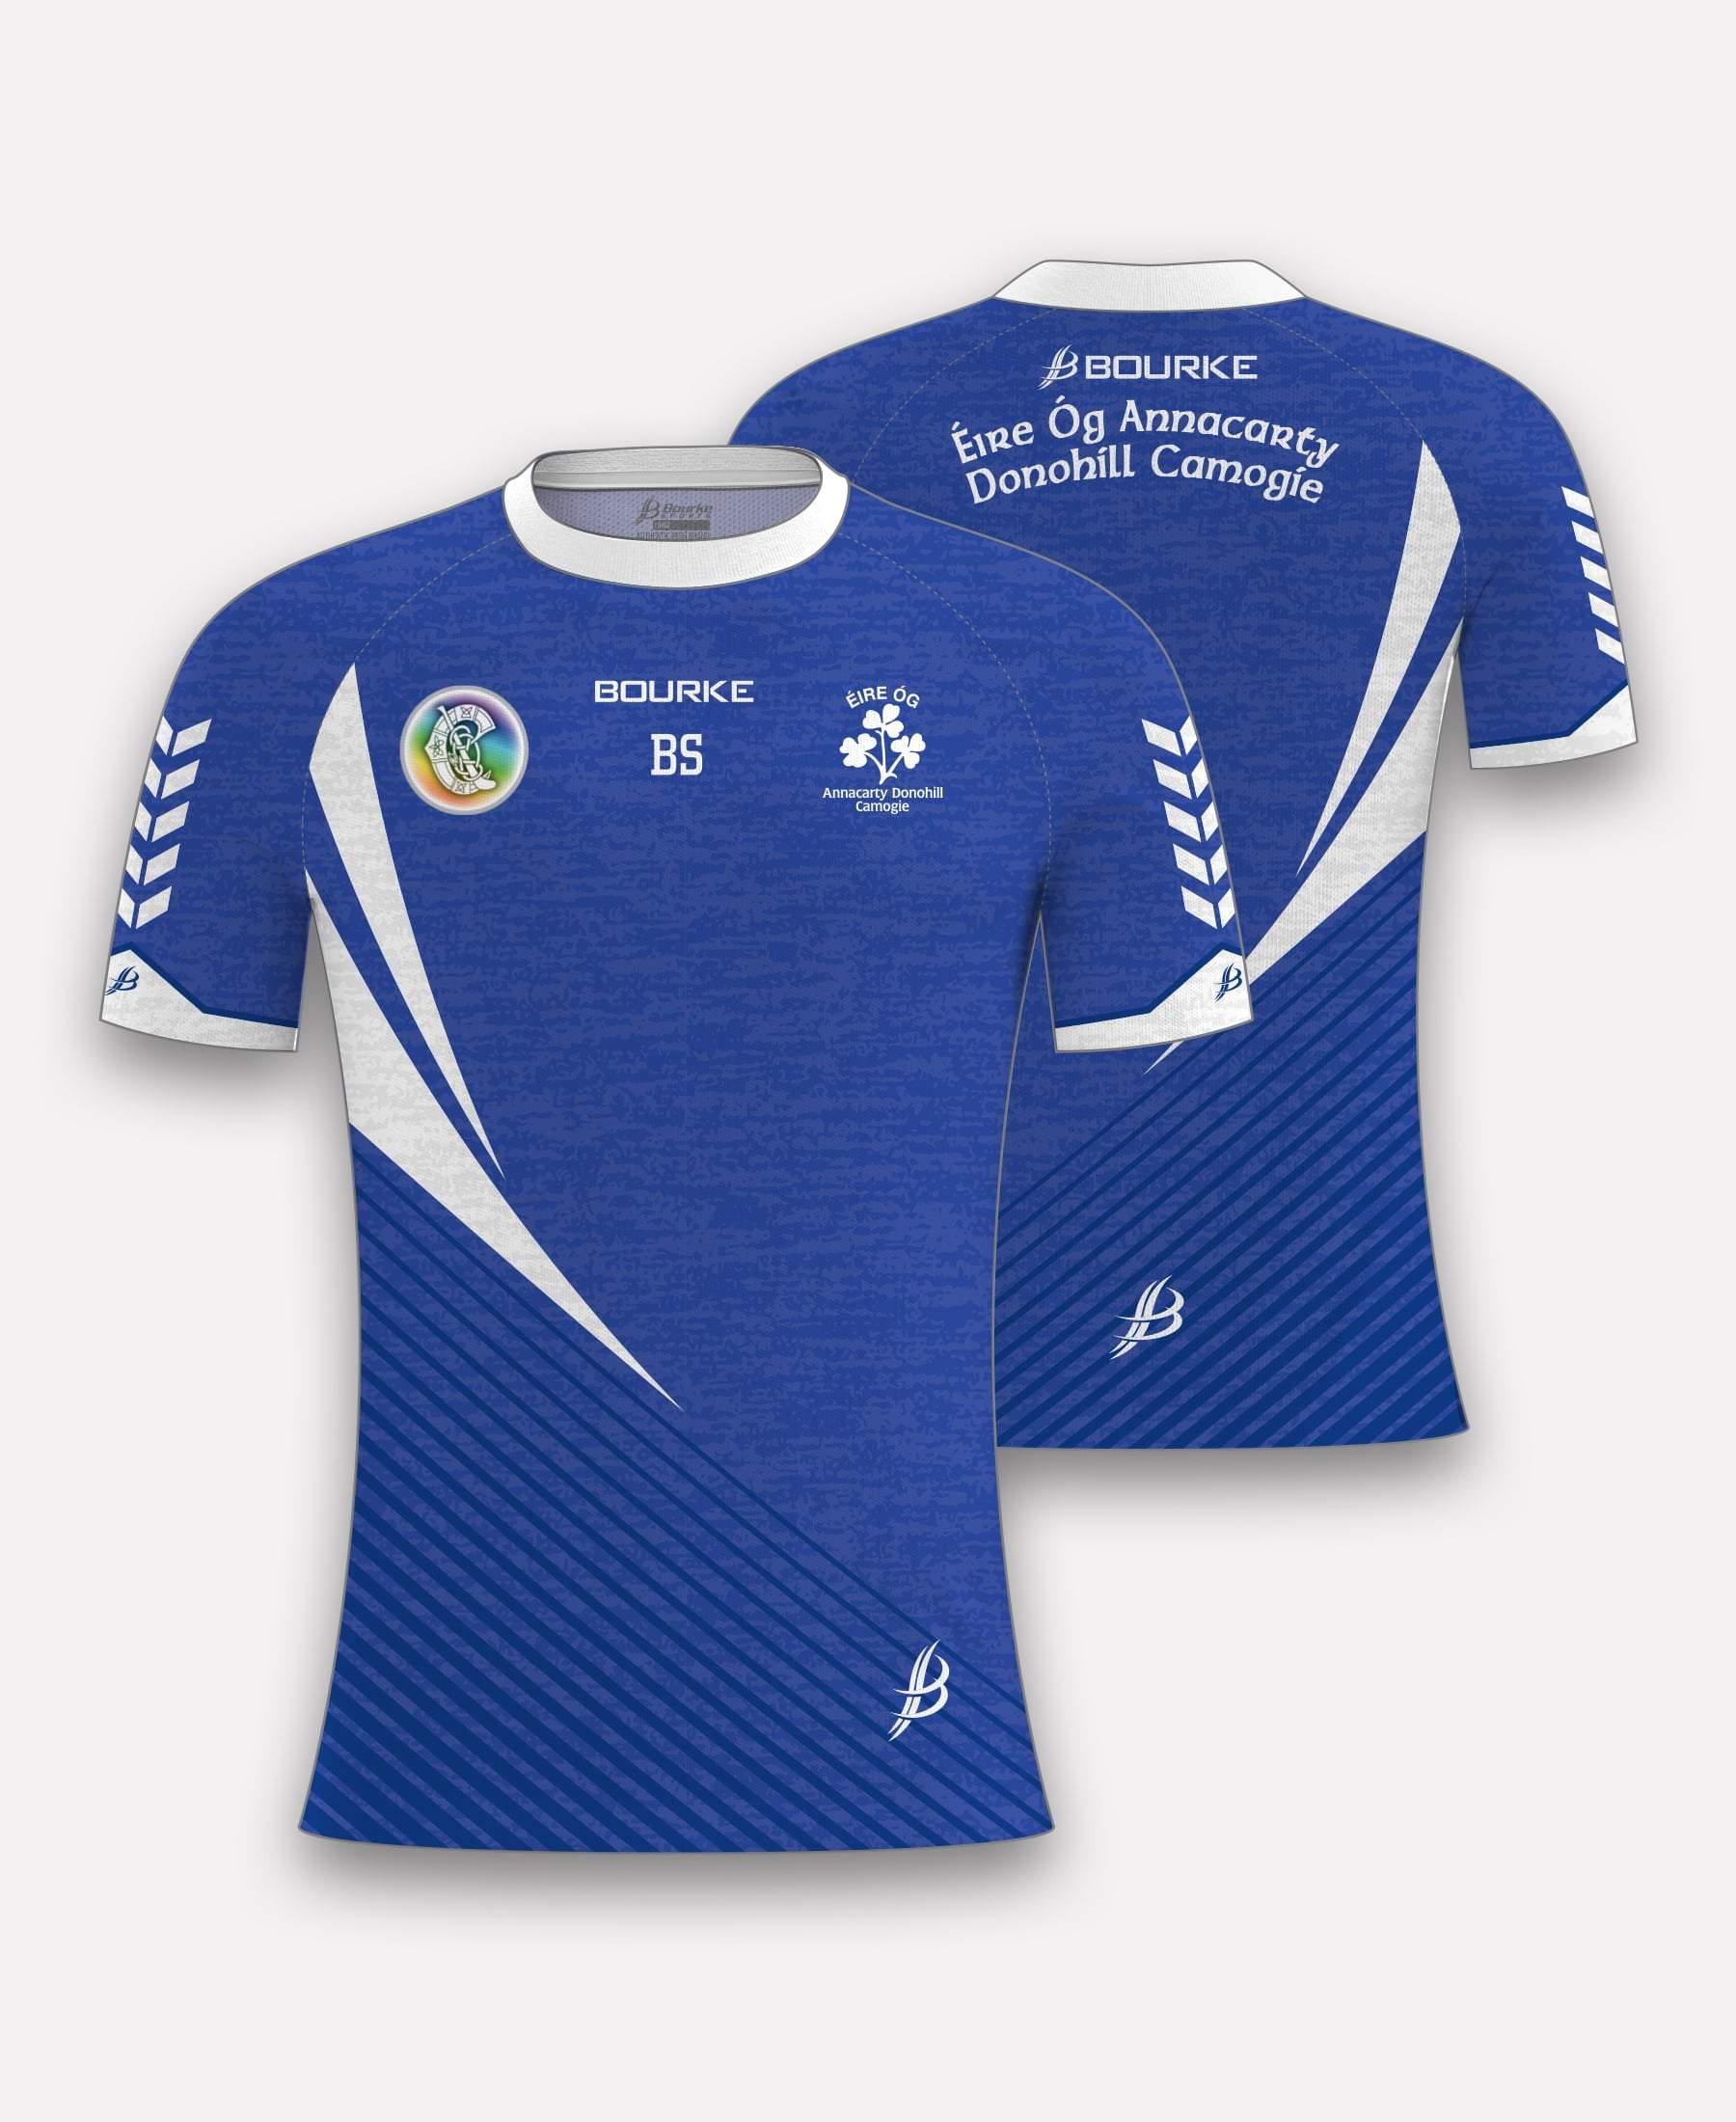 Eire Og Annacarty Donohill Camogie Jersey - Bourke Sports Limited